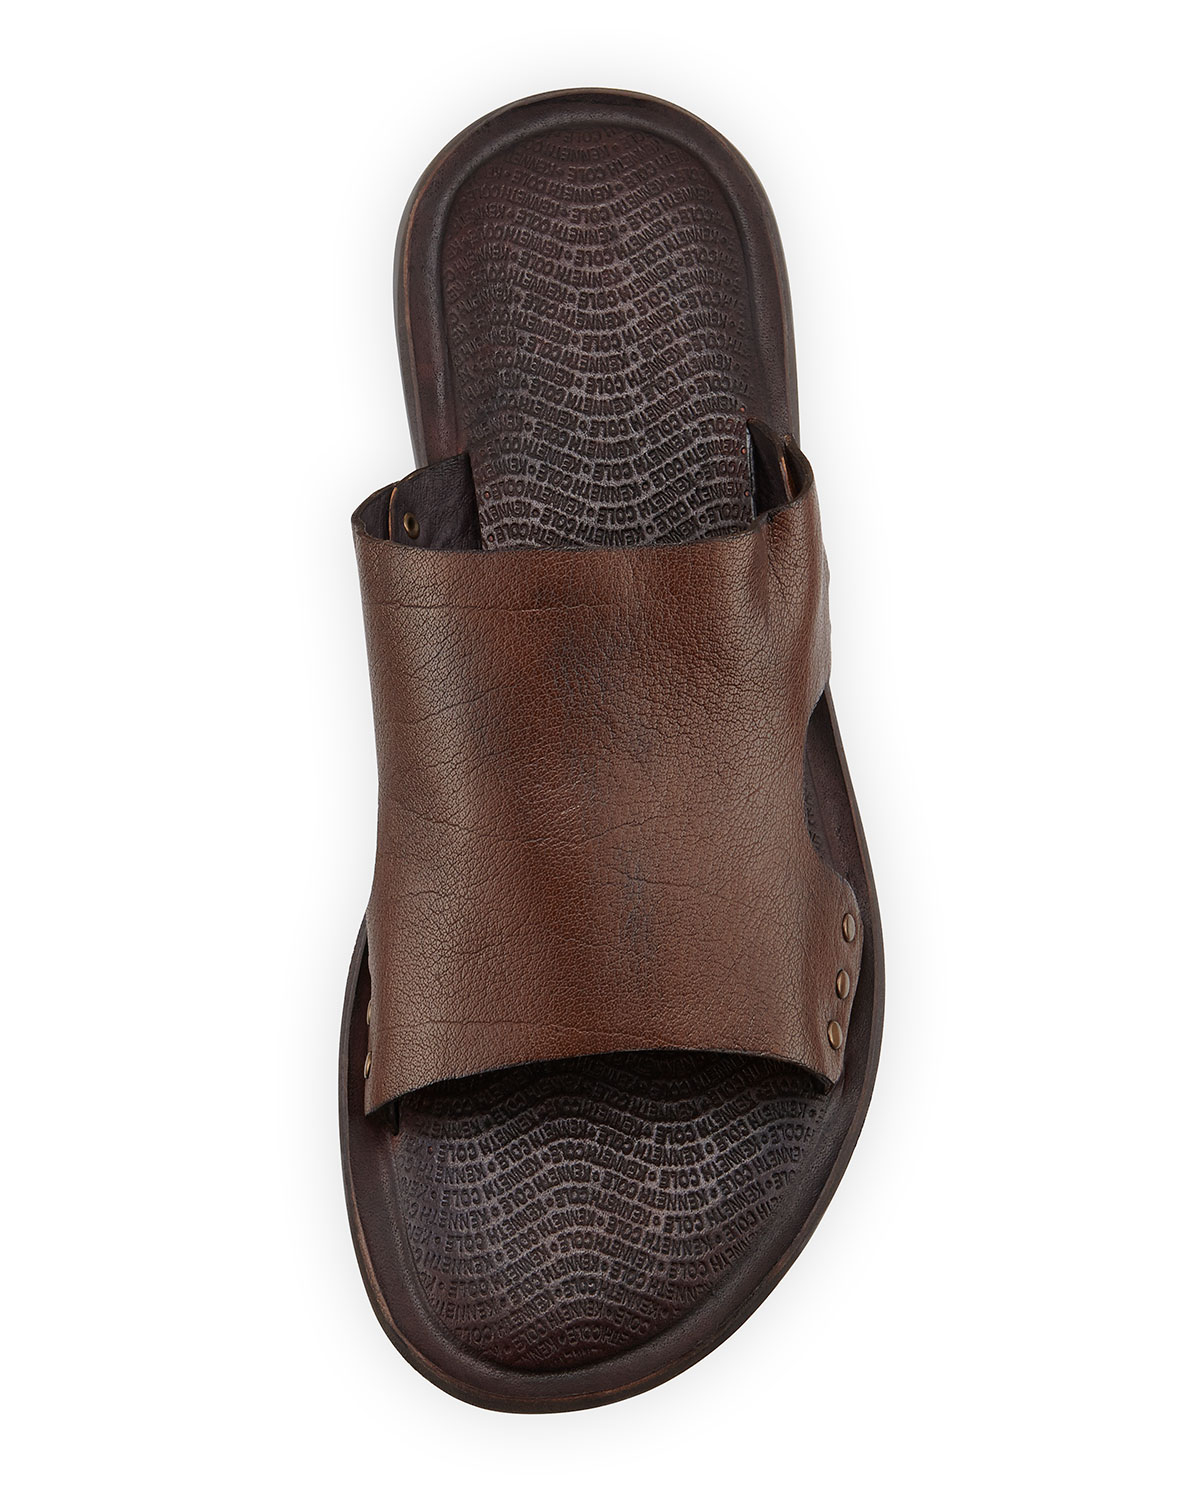 Kenneth Cole Afinity Leather Slide Sandal in Tan (Brown) for Men - Lyst